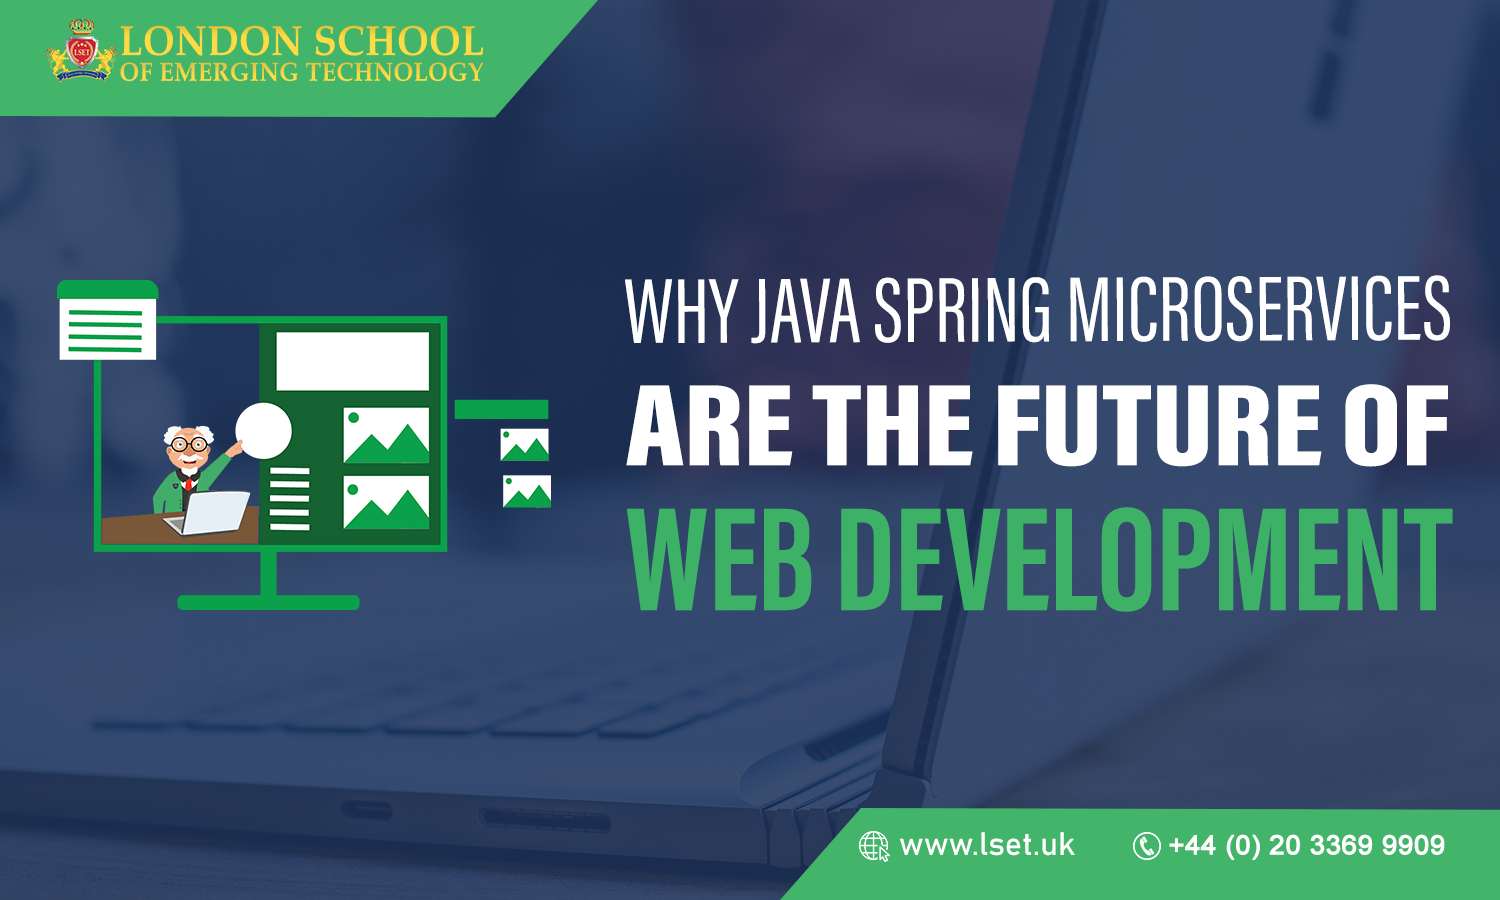 Why Java Spring Microservices are the Future of Web Development